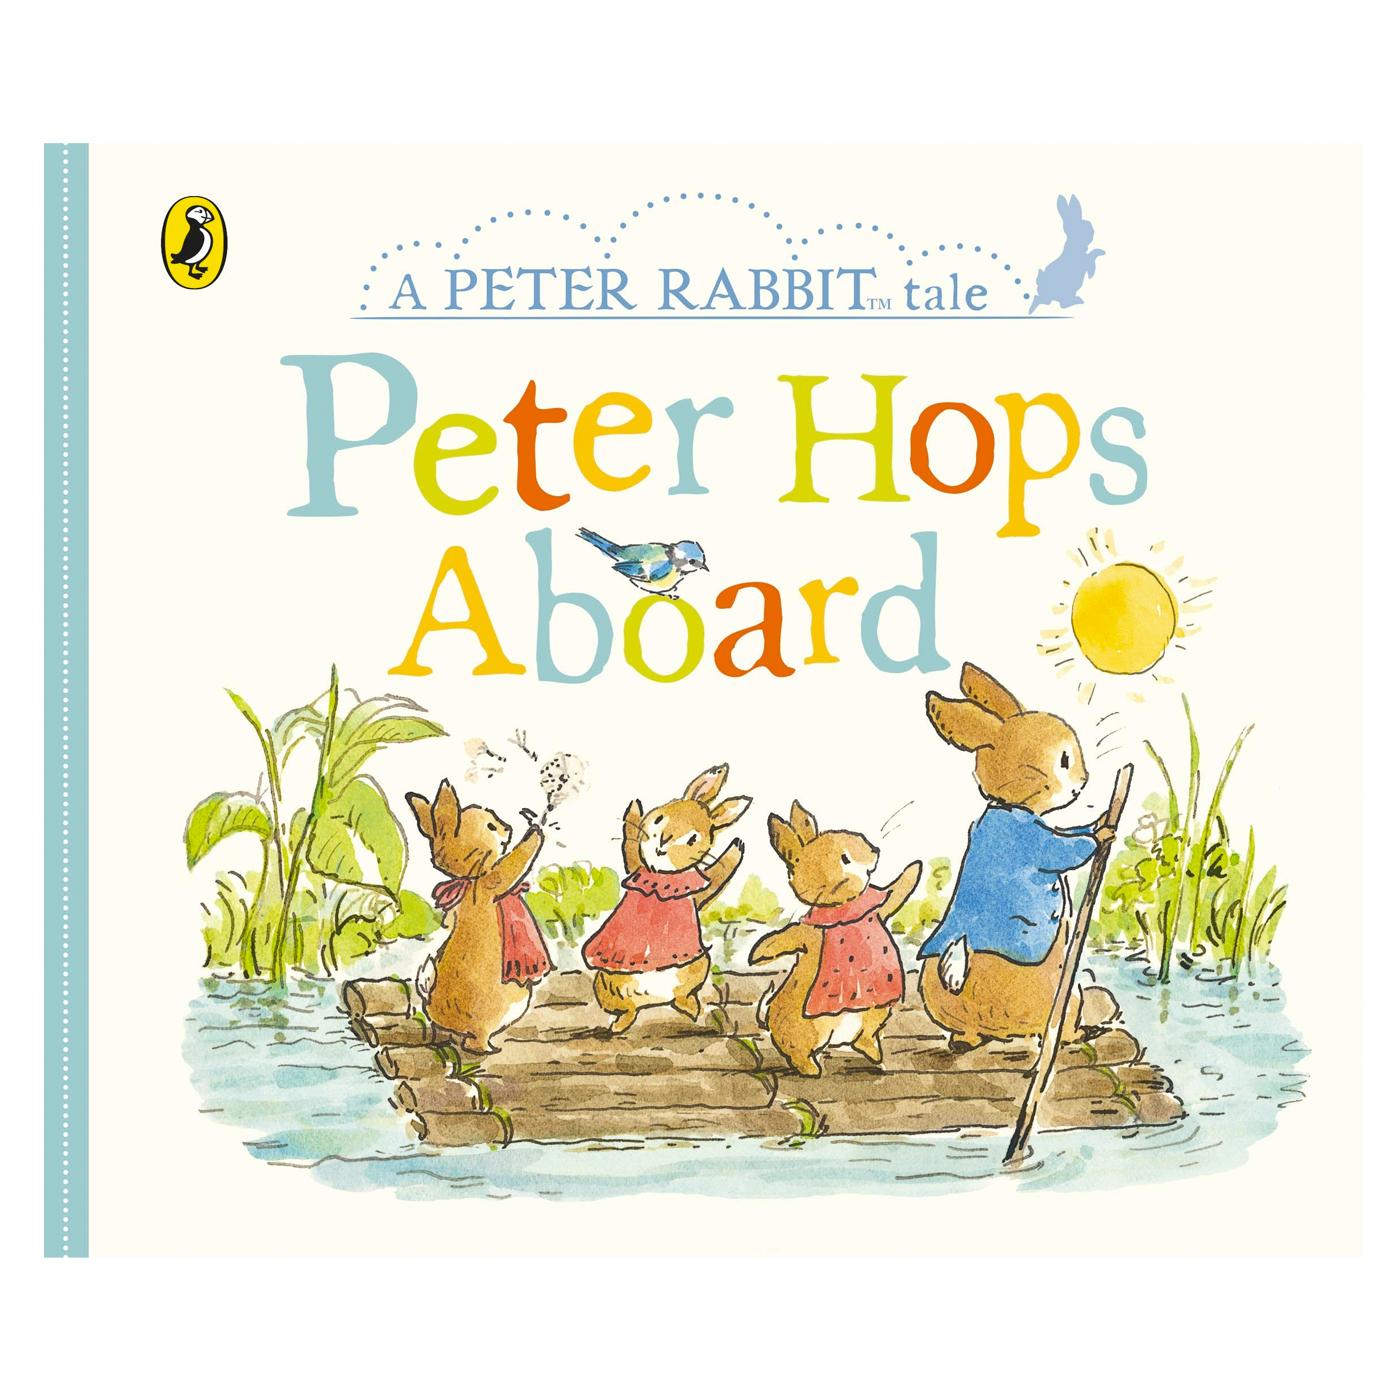 PUFFIN Peter Rabbit Tales - Peter Hops Aboard